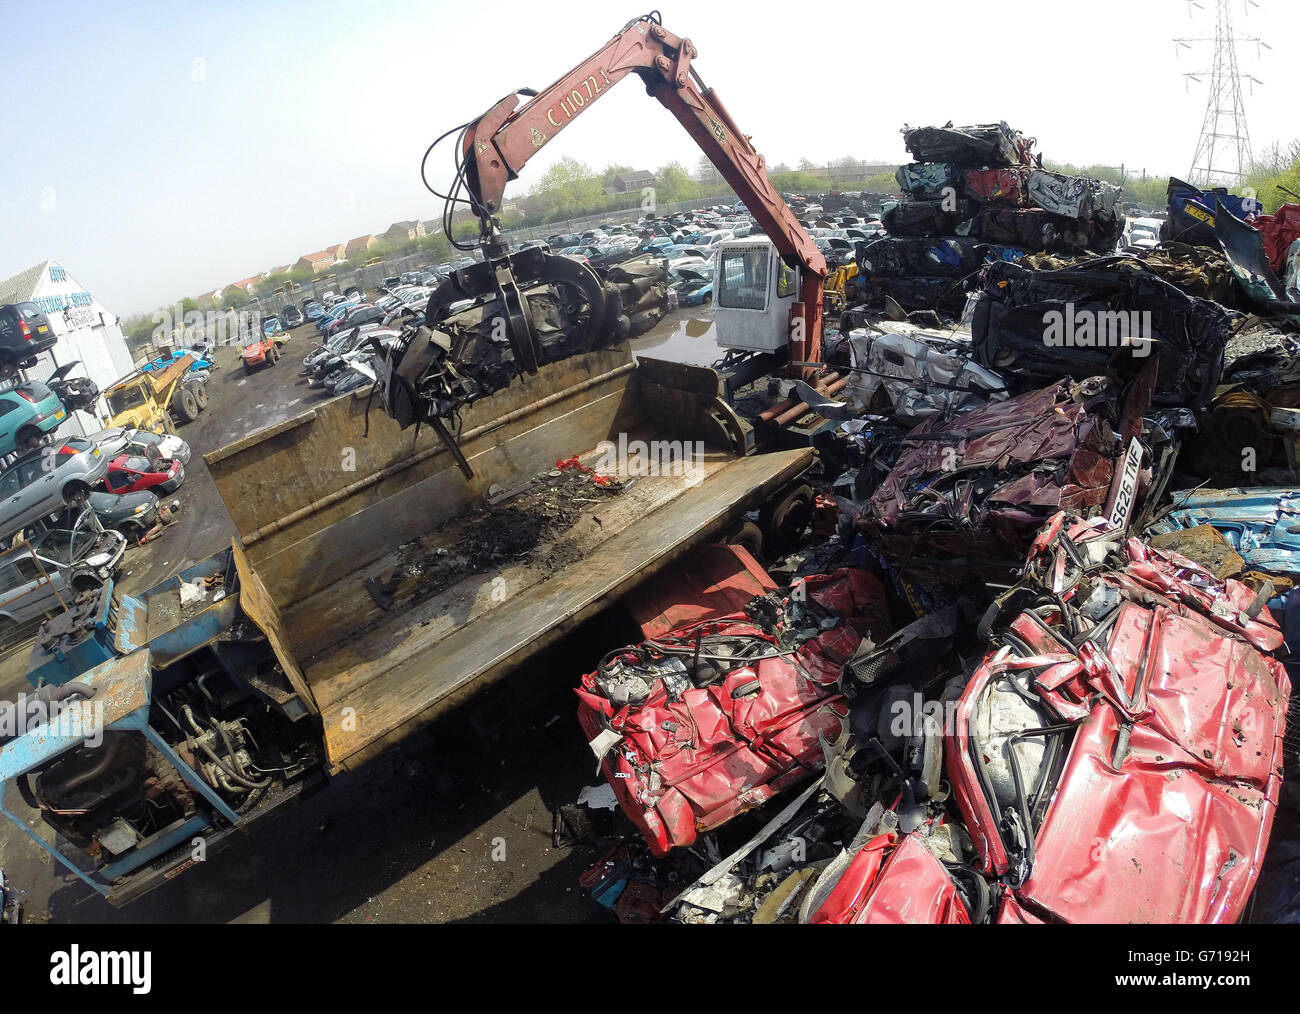 A car is crushed at the UK's largest car dismantlers, Motor Hog in North Shields, Tyneside, which has bought specialist dismantling and de-polluting equipment capable of handling over 200 vehicles per day and crushing hundreds of thousands a year. Stock Photo